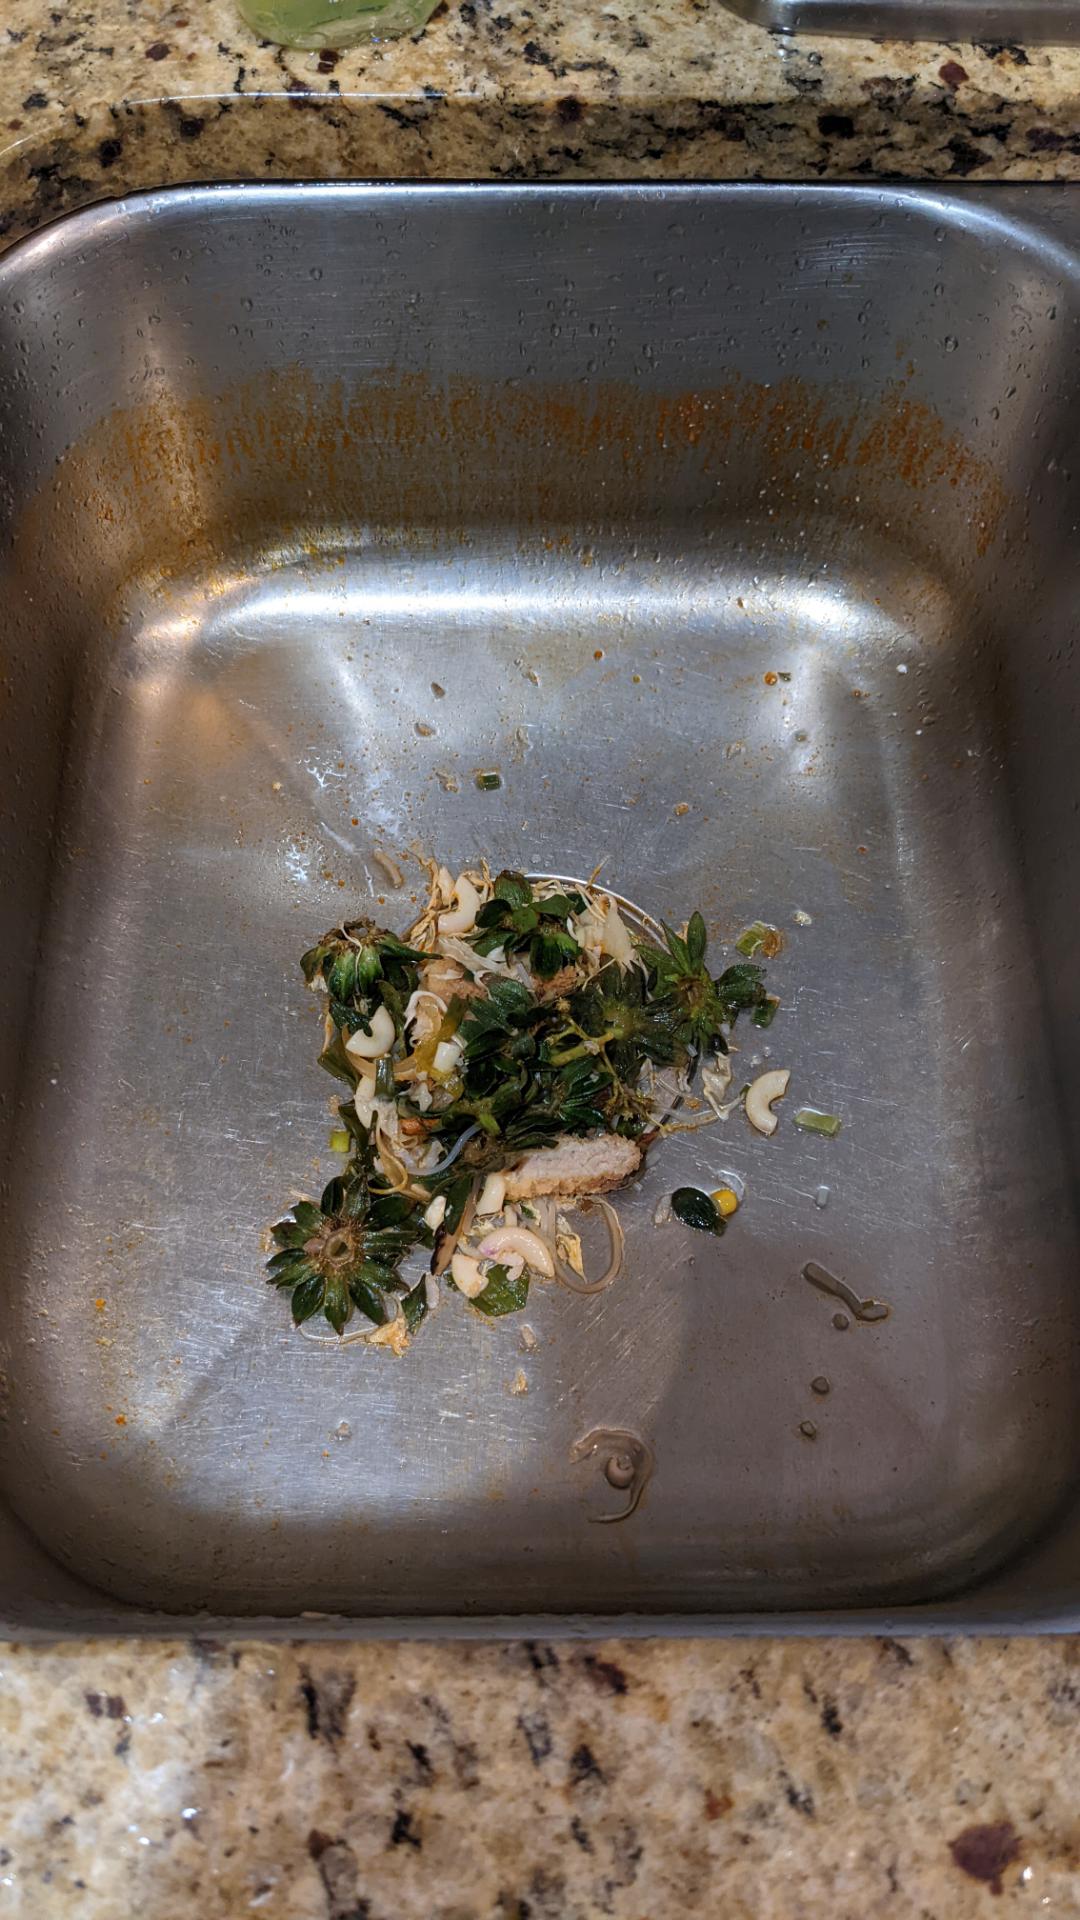 My wife just throws her kitchen scraps in the sink instead of the trashcan because "the disposal can handle it." The sink disposal is not a trashcan, right??